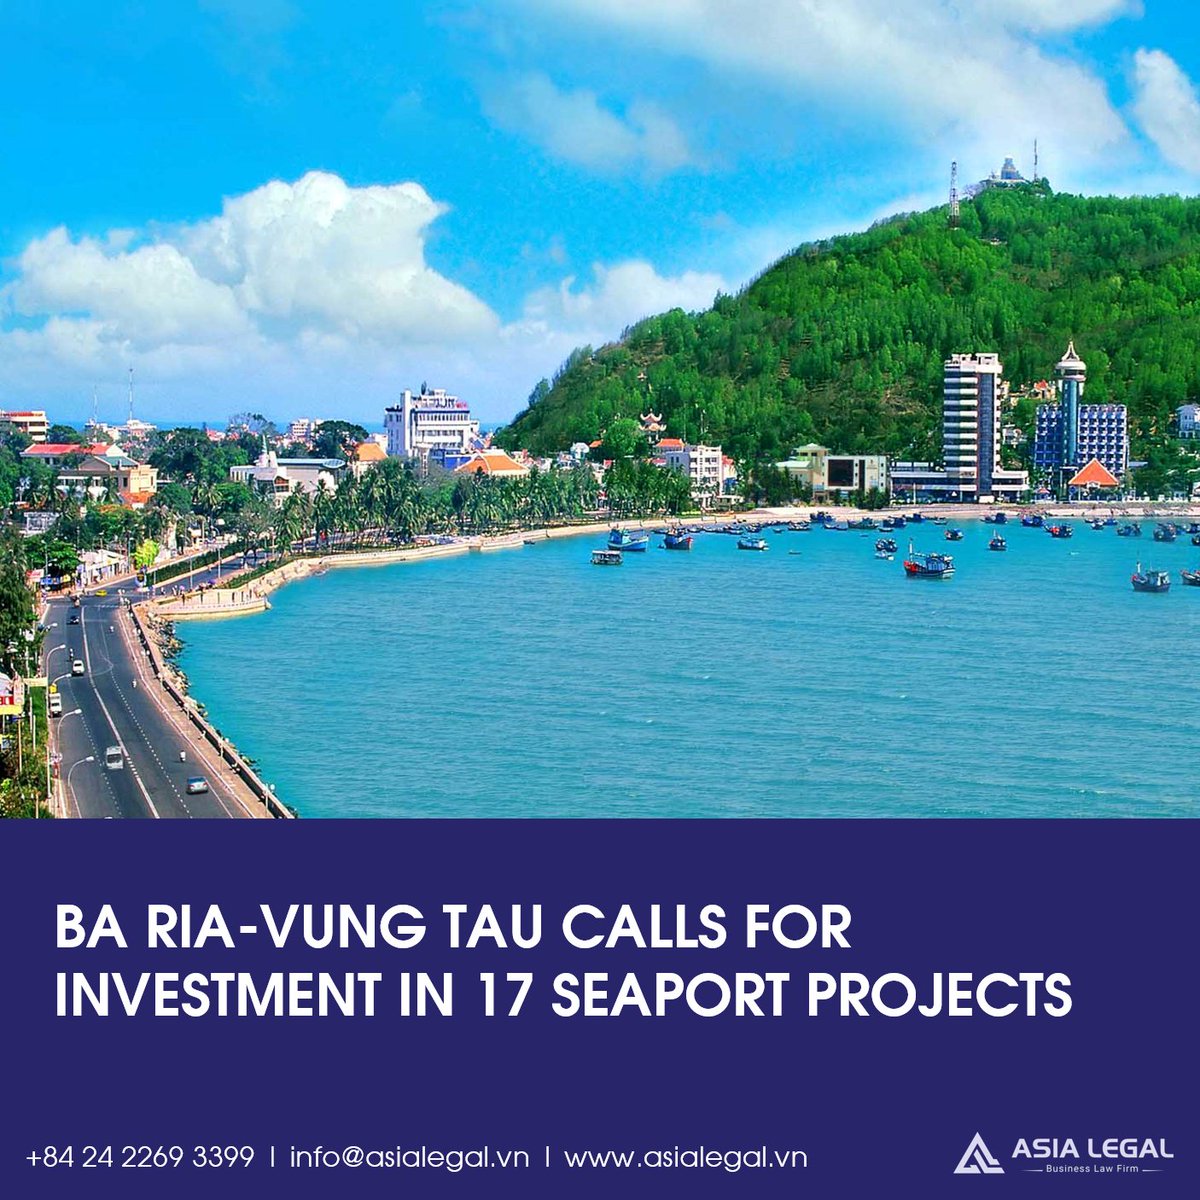 Ba Ria-Vung Tau calls for investment in 17 seaport projects

View more at:
asialegal.vn/ba-ria-vung-ta…

#asialegal #businesslawfirm #invest #investinVietnam #Baria #vungtau #bariavungtau